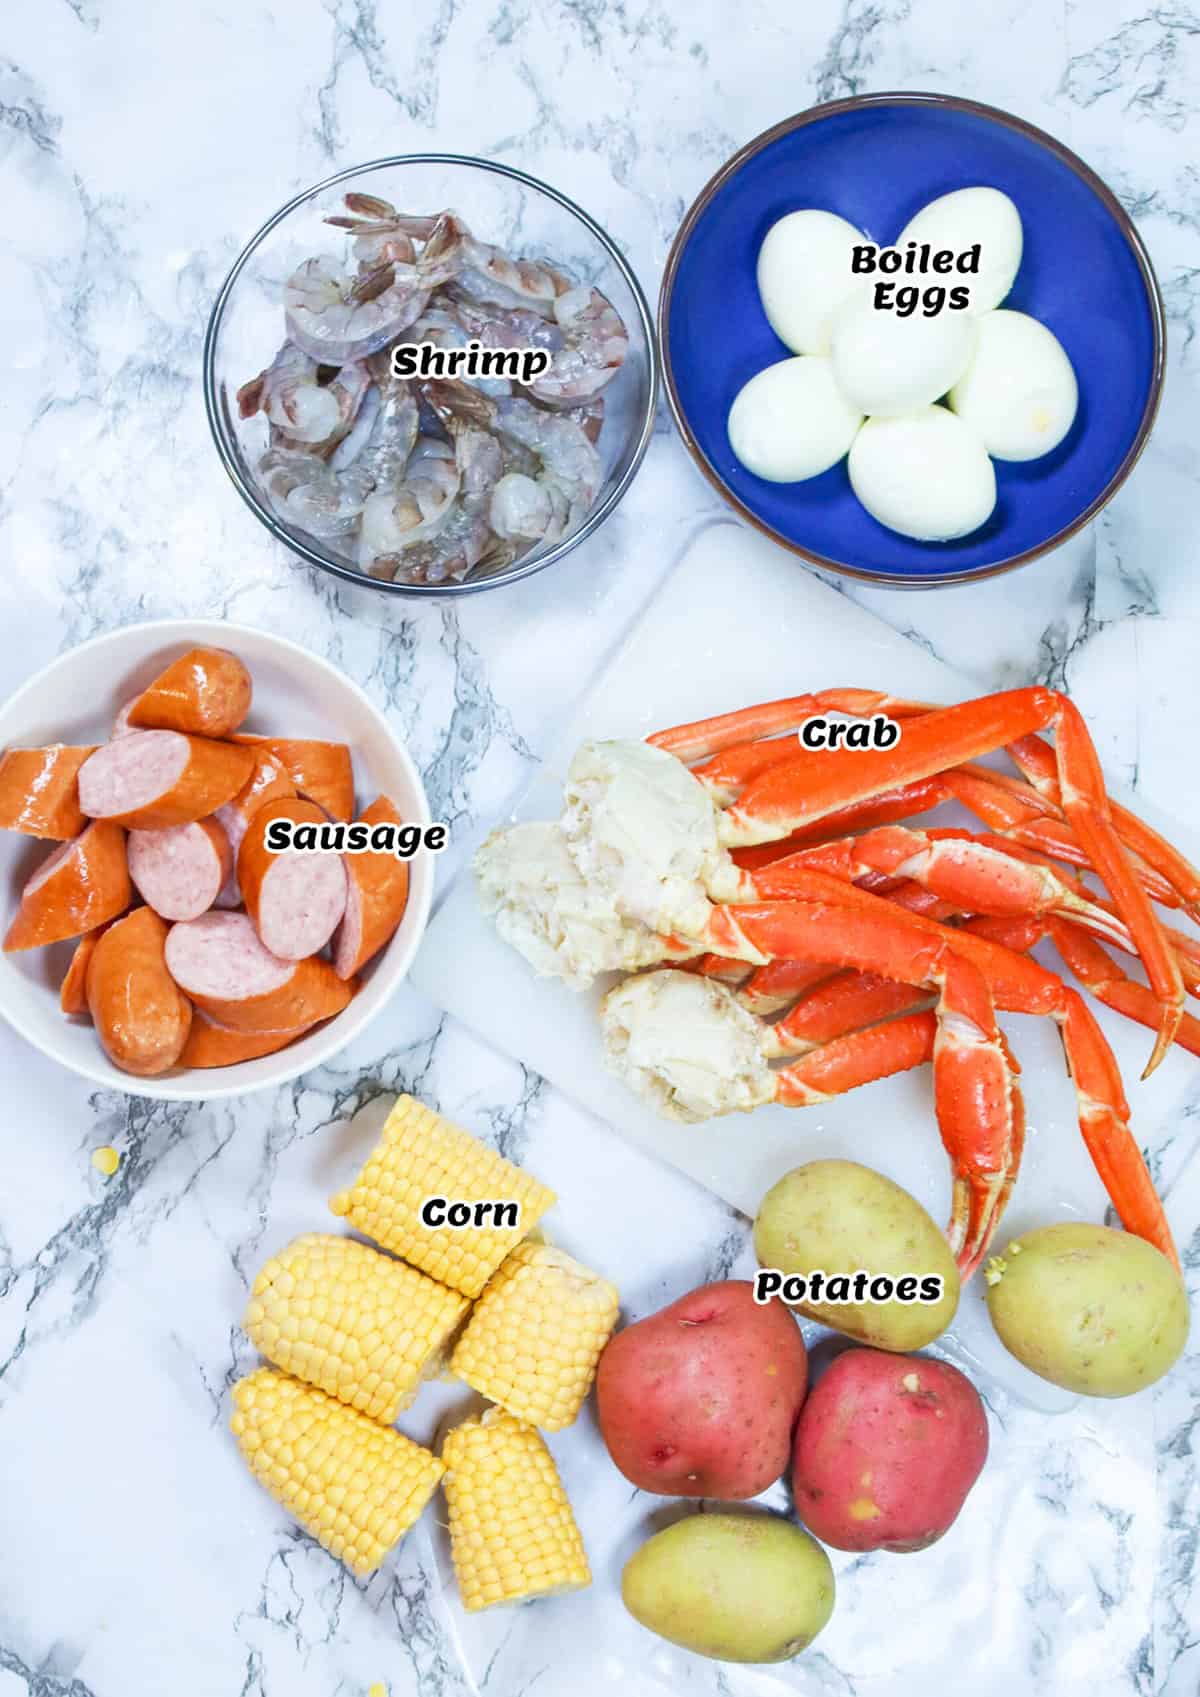 Recipe ingredients for Seafood Boil in a Bag